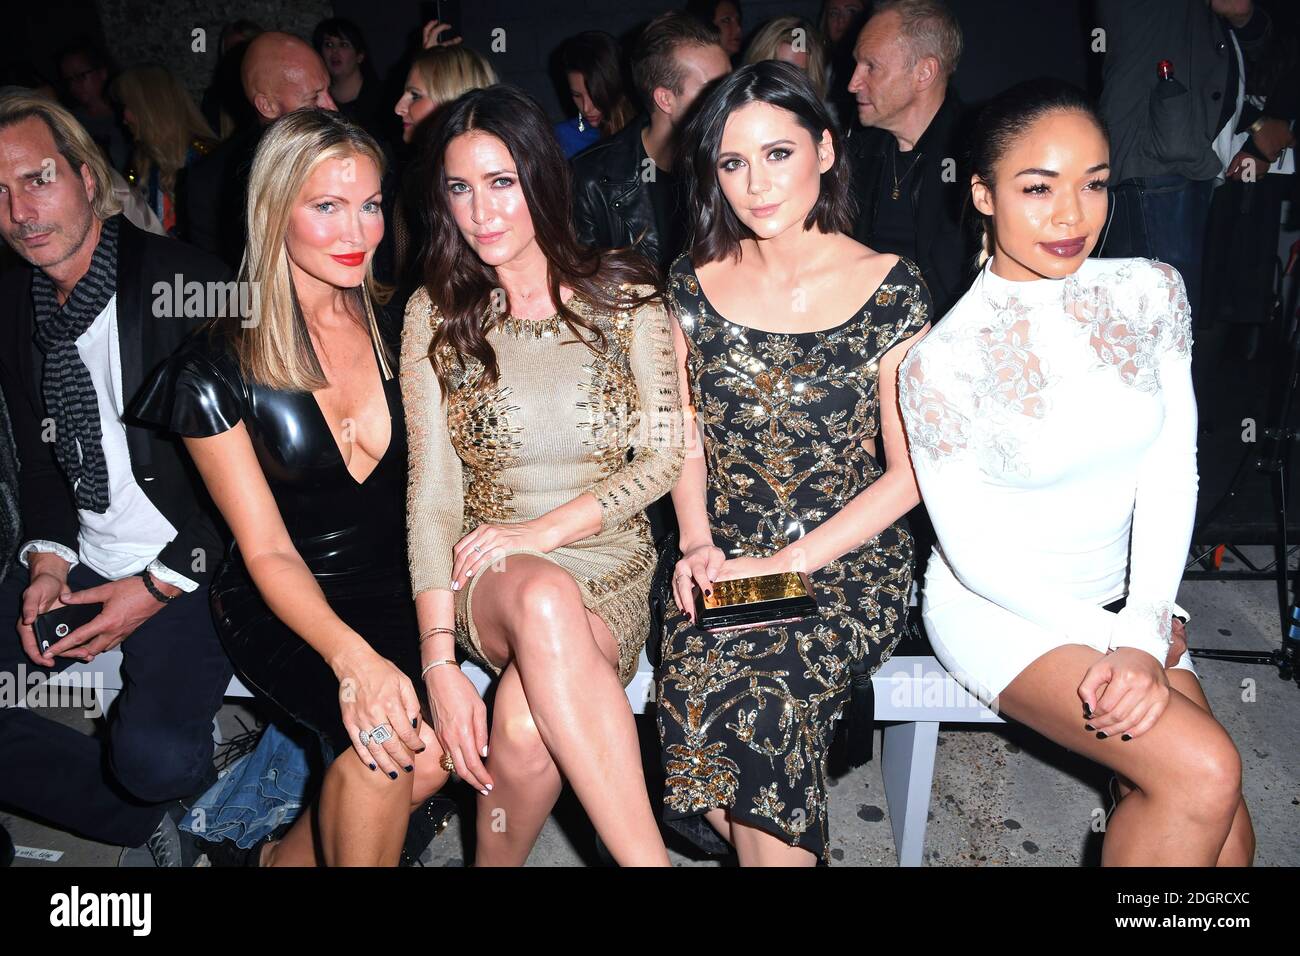 Caprice Bourret (L - R), Lisa Snowden, Lilah Parsons and Sarah-Jane  Crawford during the Julien Mcdonald Front Row London Fashion Week SS18 show  held at No 1 Invicta Plaza London. Picture date: